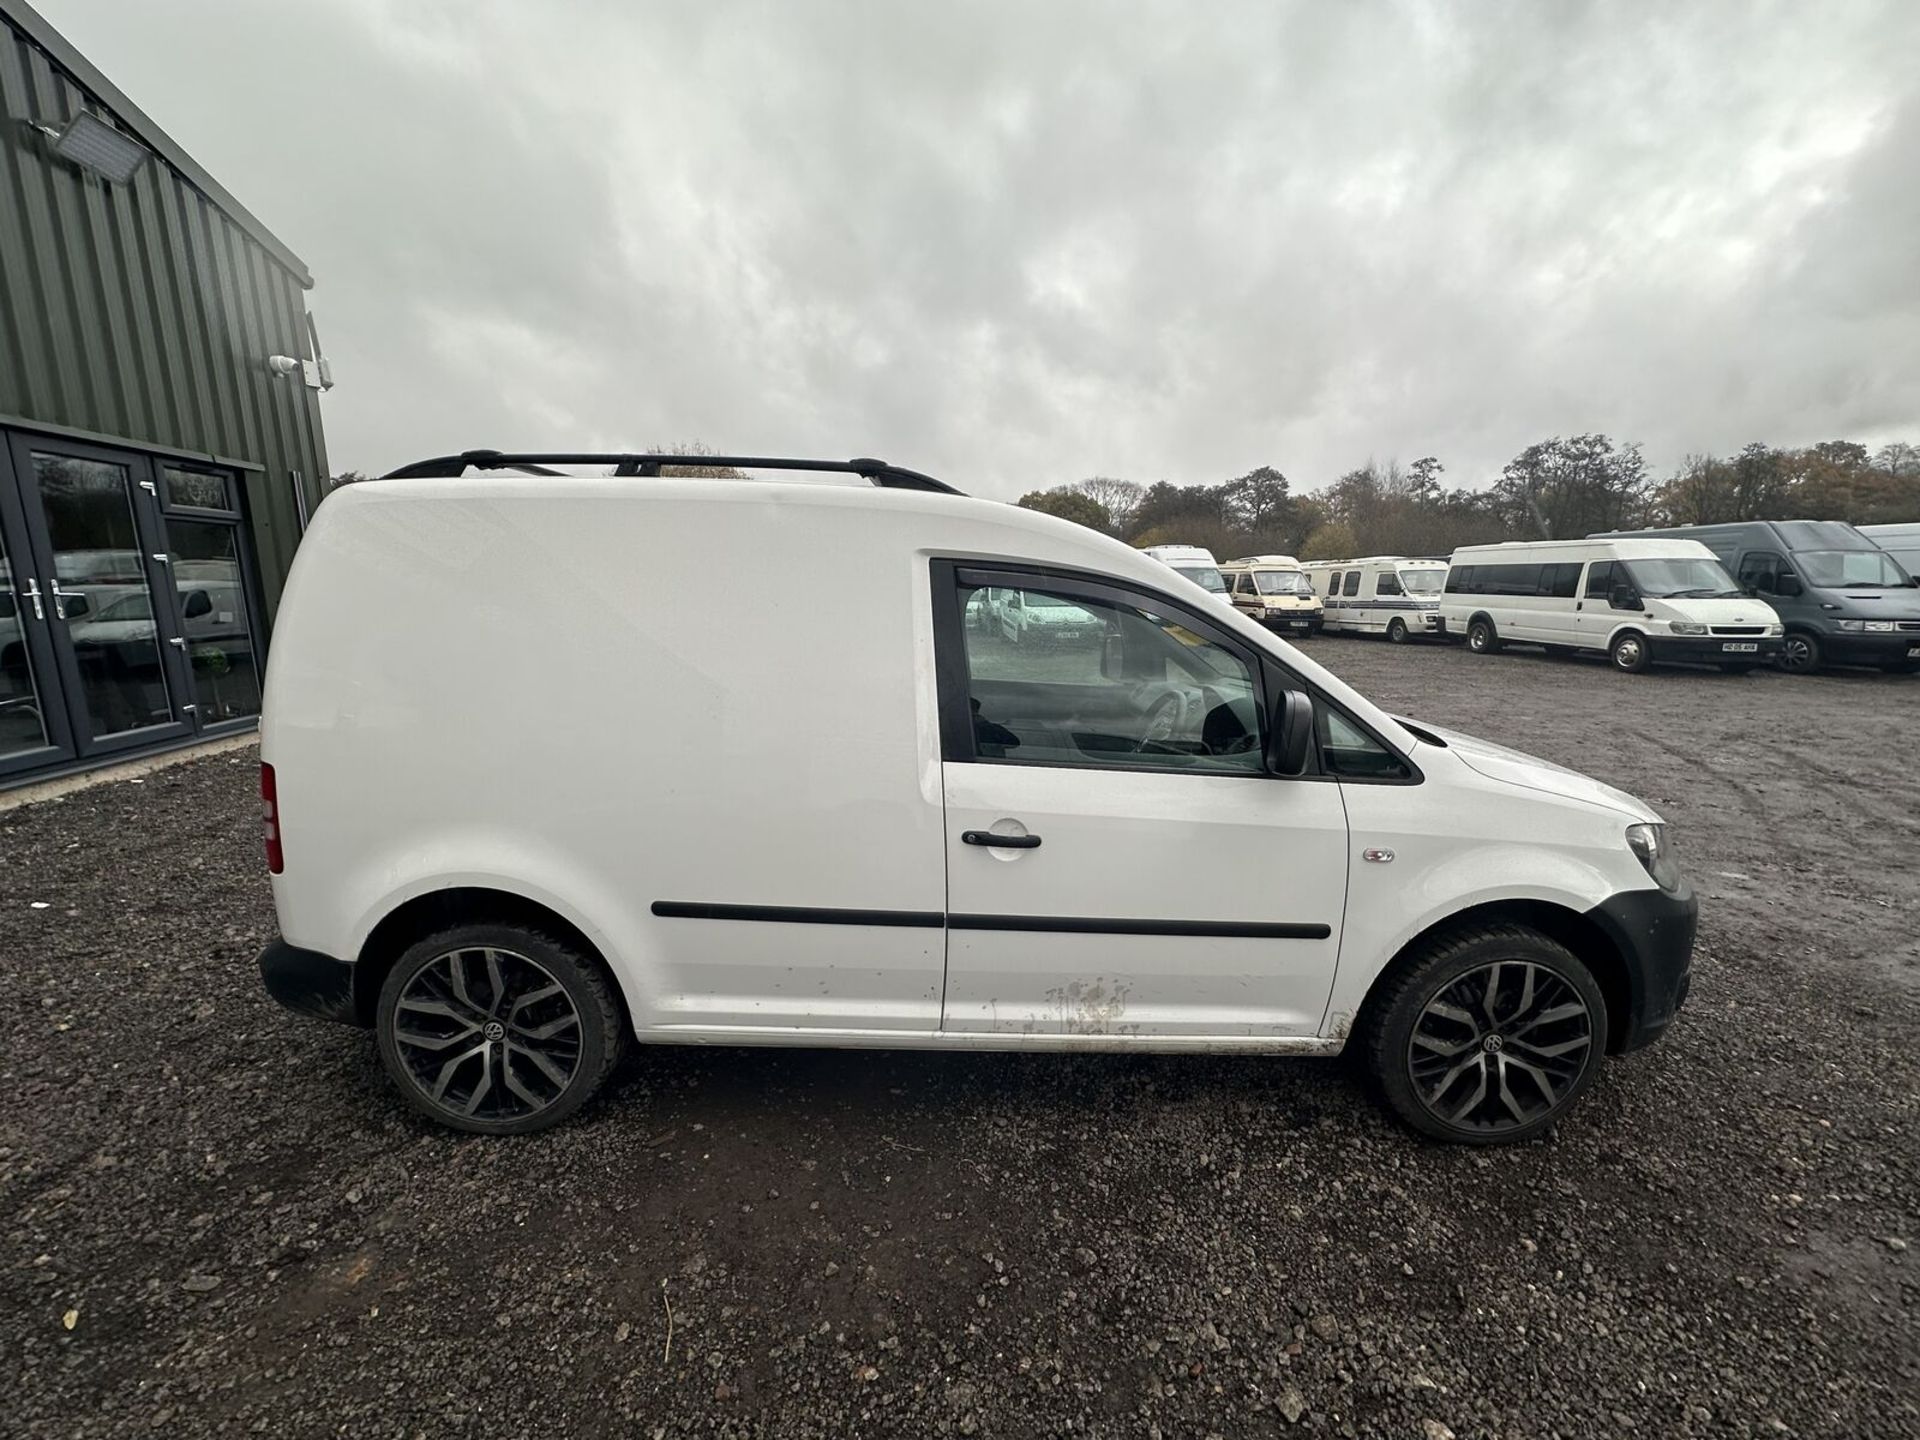 2016 VOLKSWAGEN CADDY C20 1.6 TDI - READY FOR YOUR BUSINESS >>--NO VAT ON HAMMER--<< - Image 17 of 19